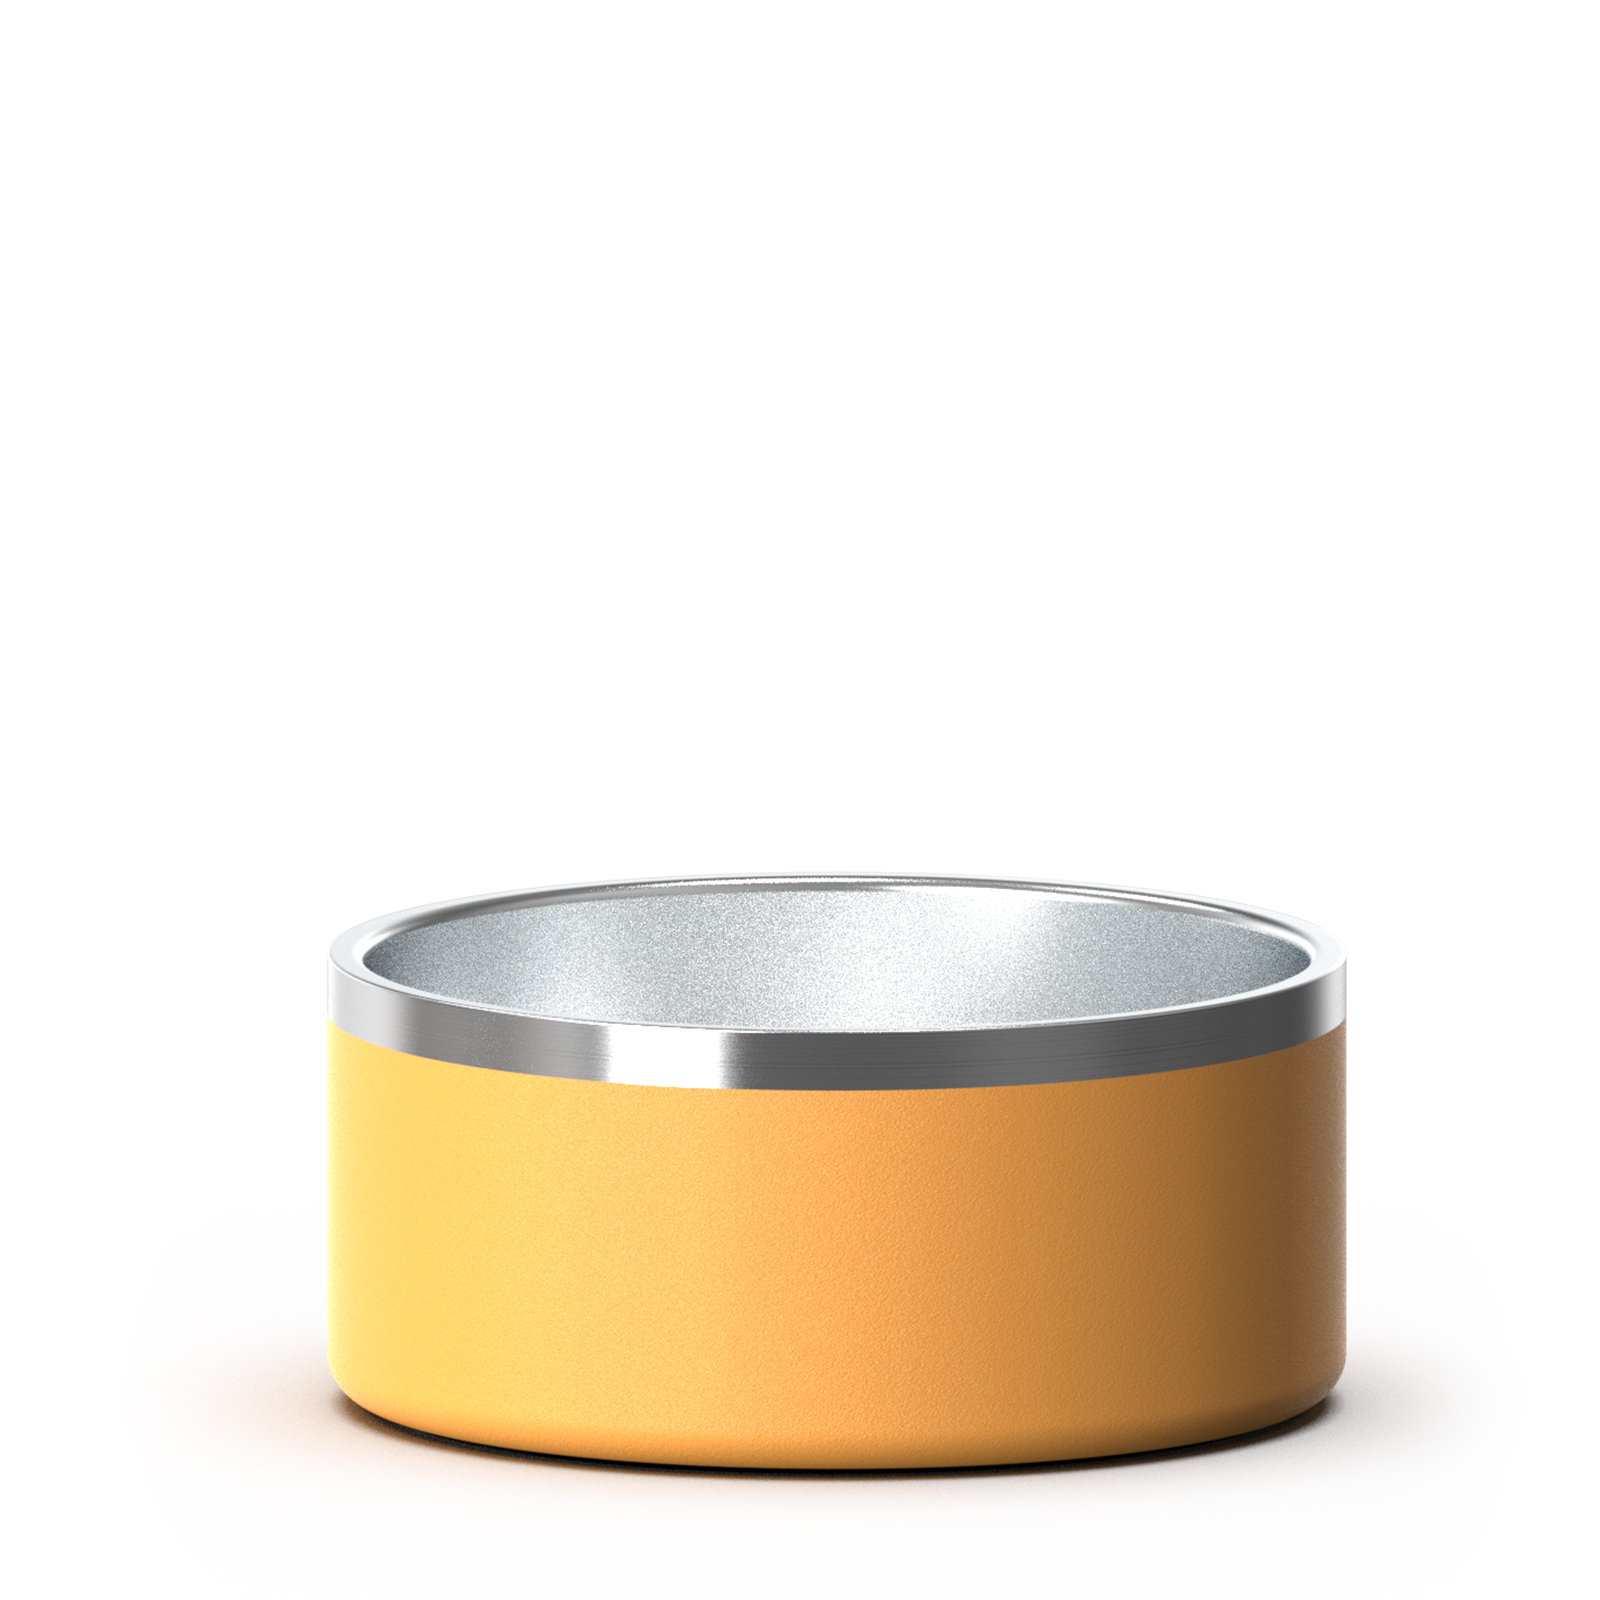 Stainless steel Pet bowl